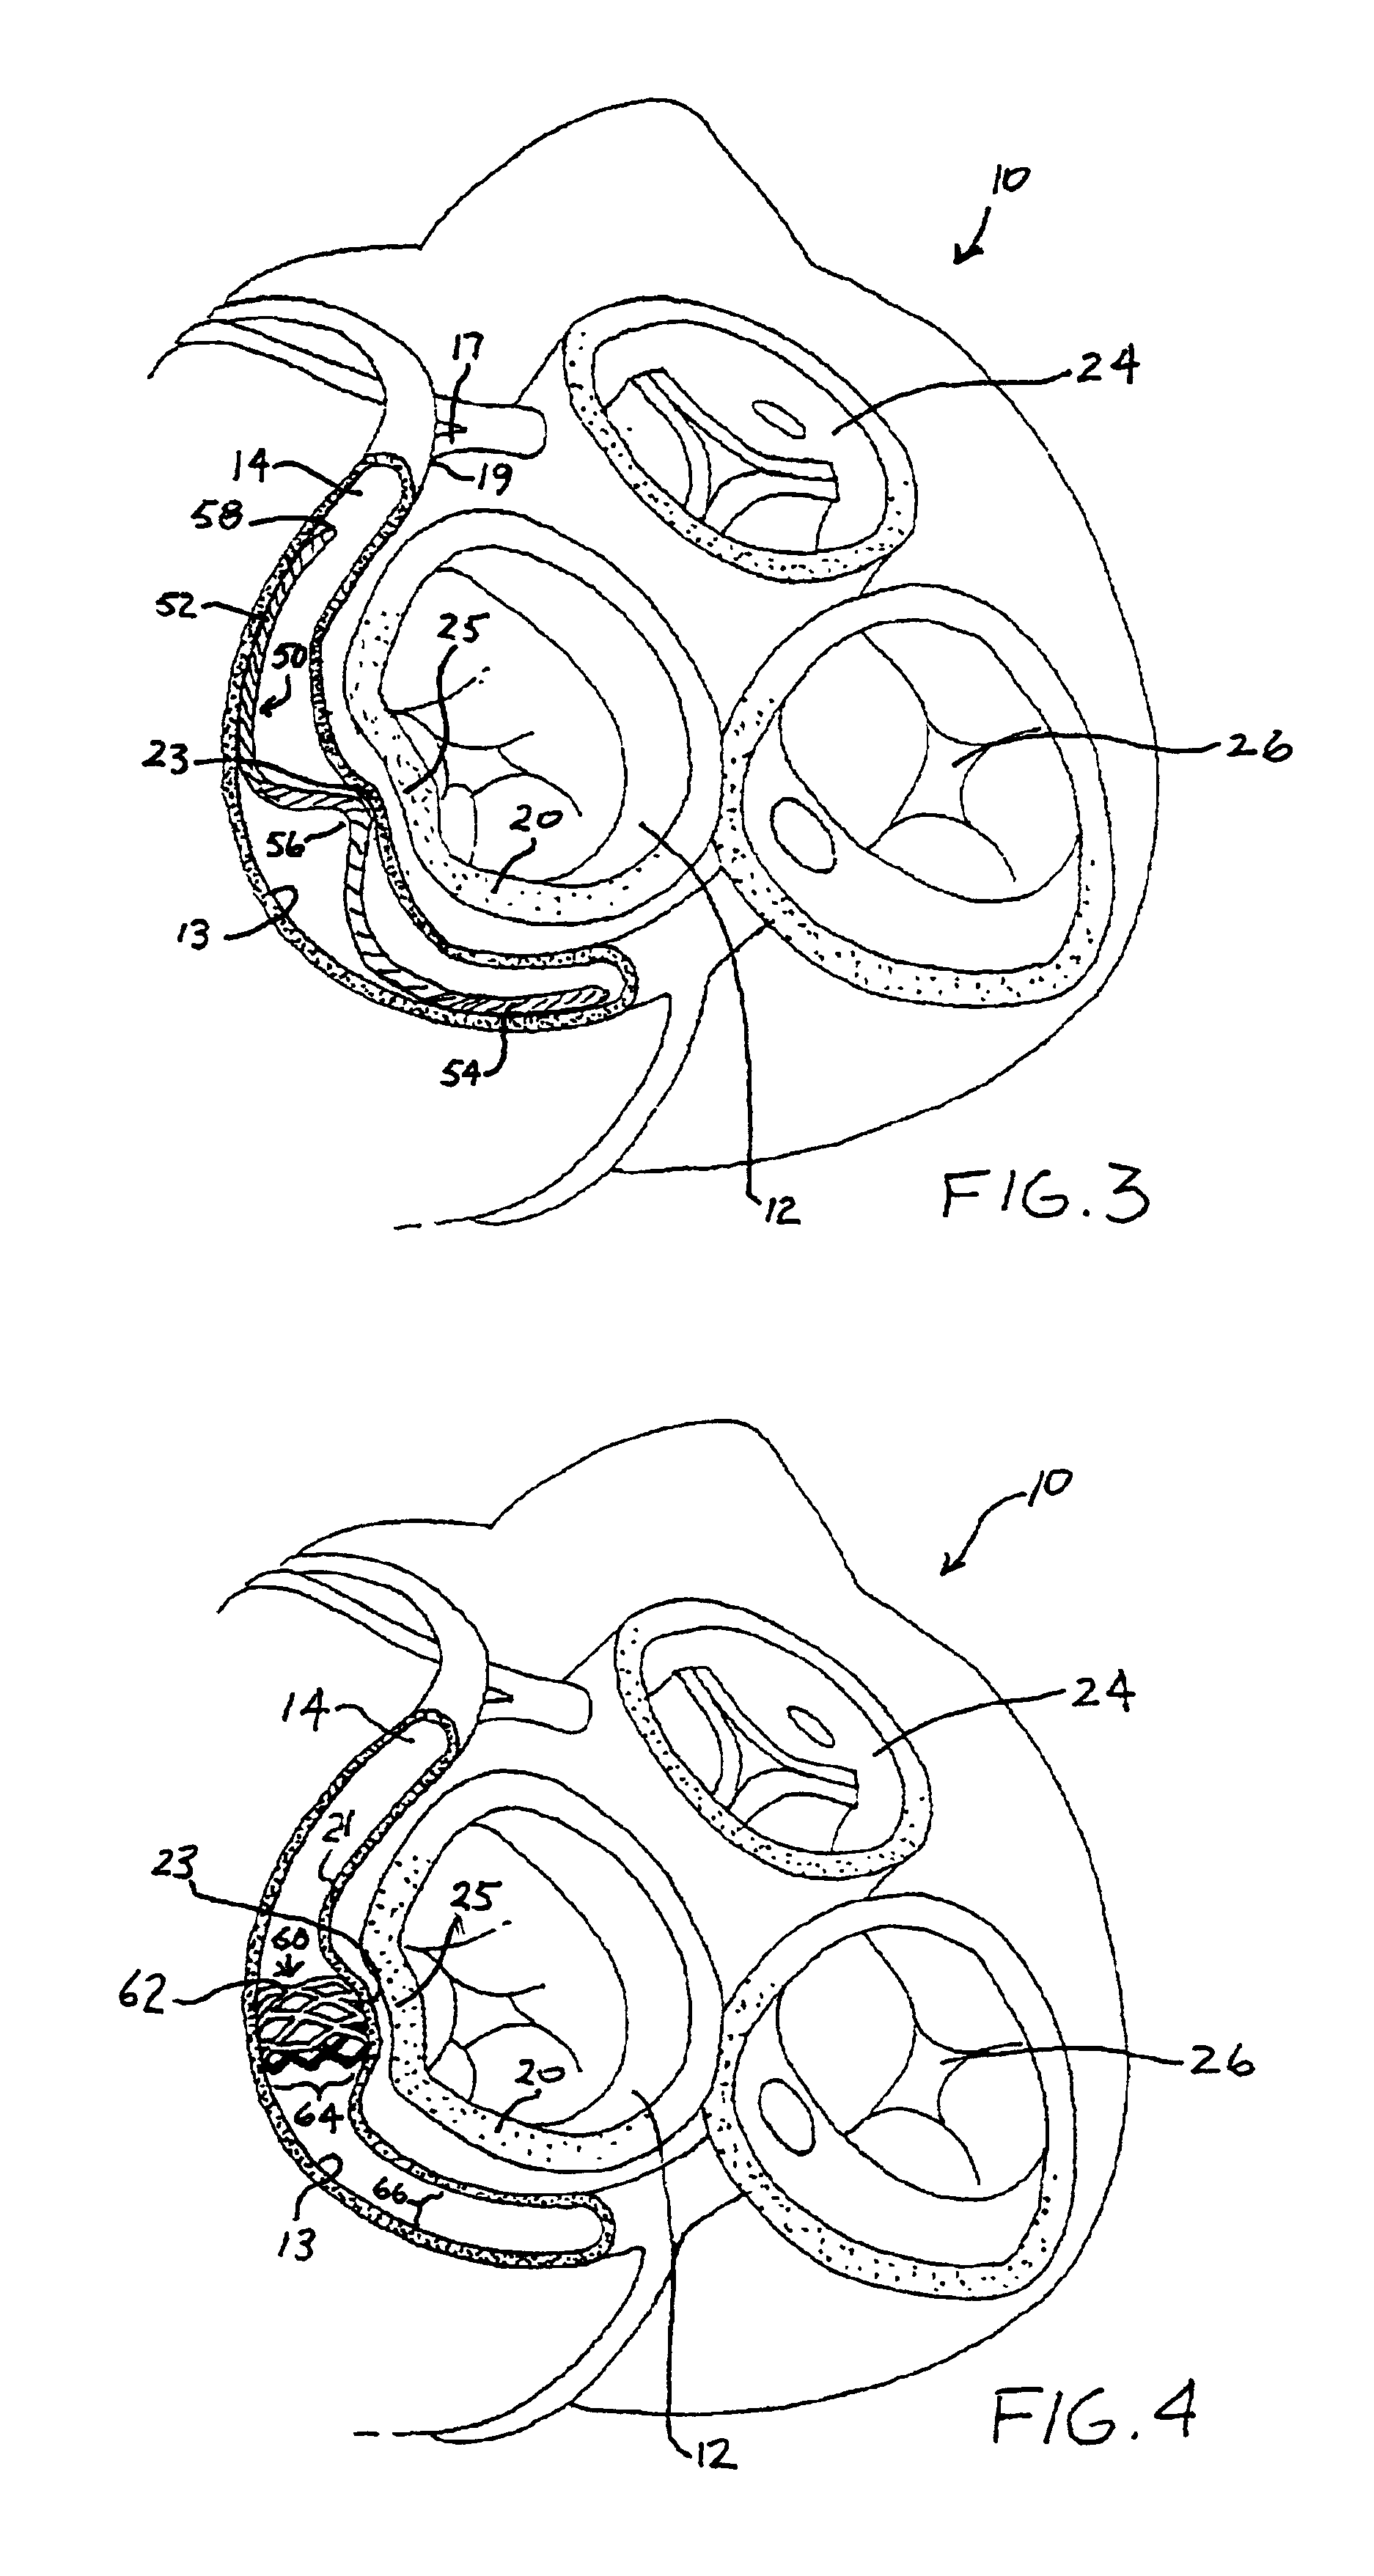 Focused compression mitral valve device and method